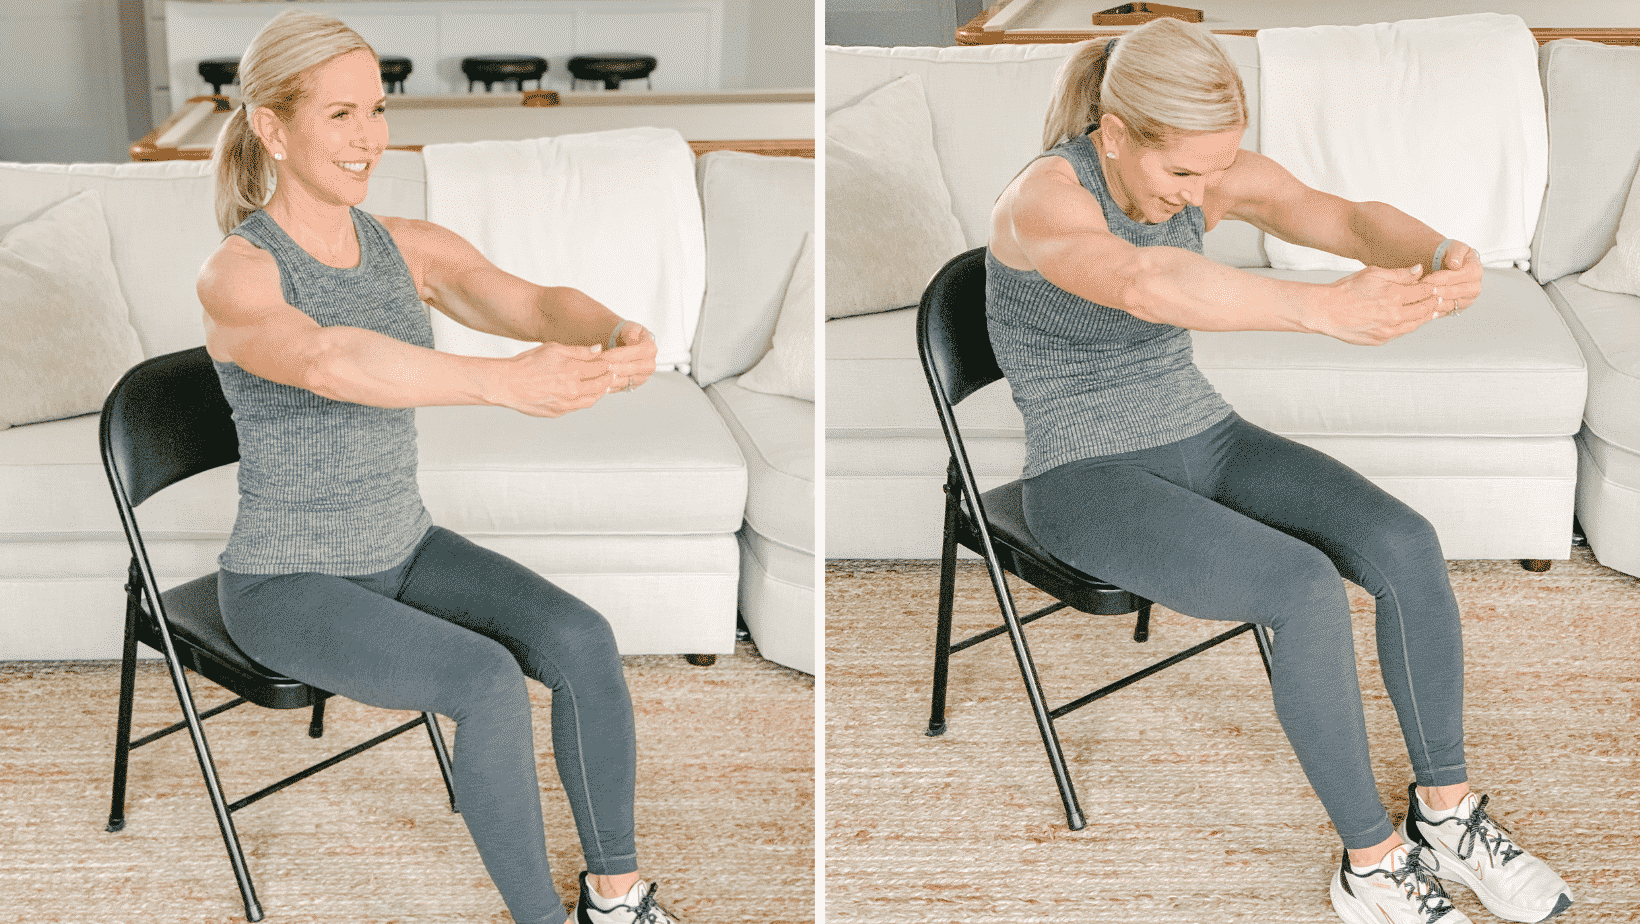 Chris Freytag demonstrating core exercises for older adults – seated half roll-back